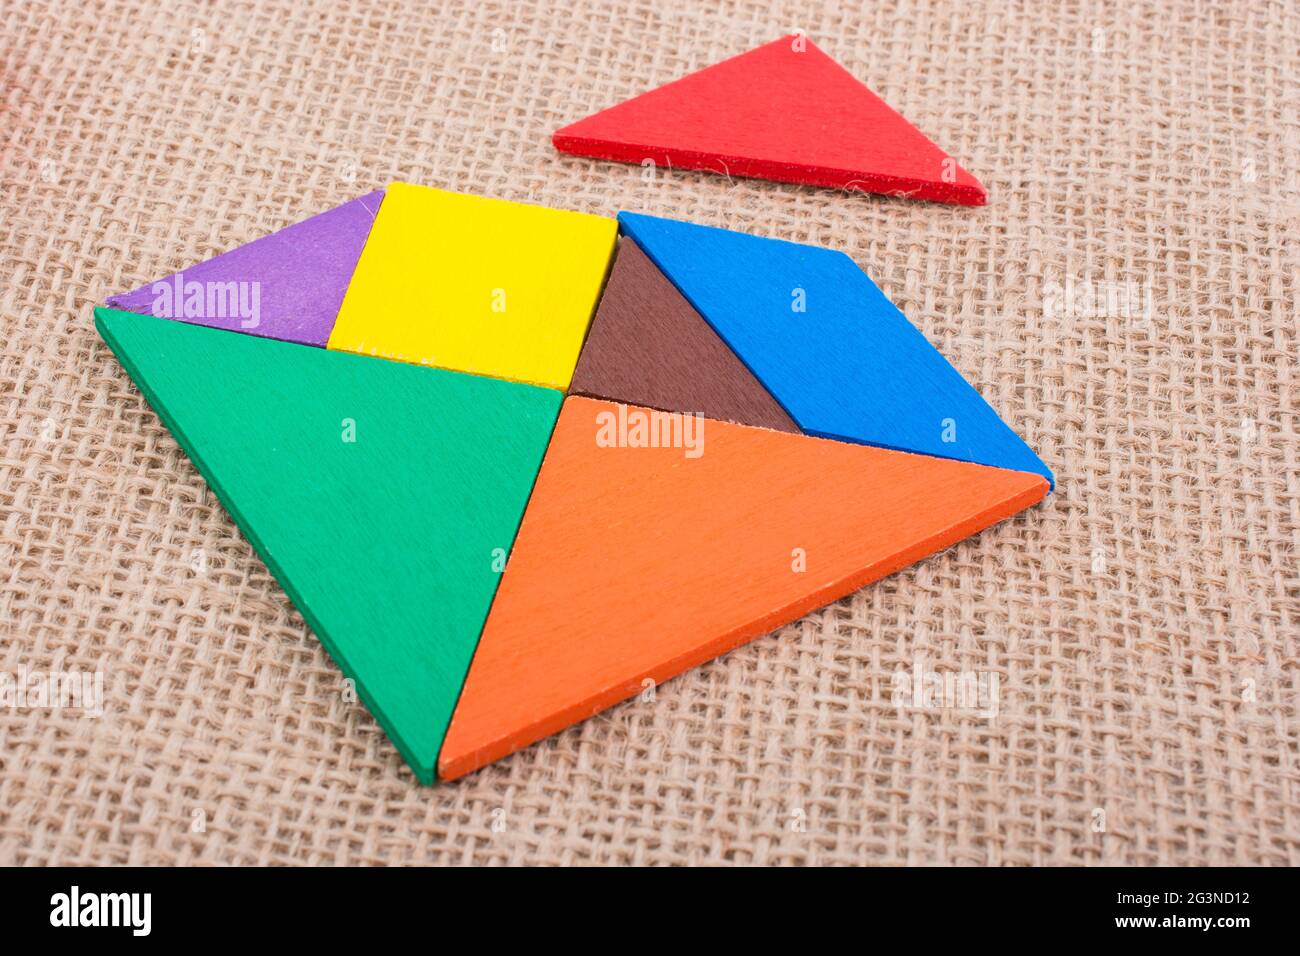 Pieces of a square tangram puzzle Stock Photo